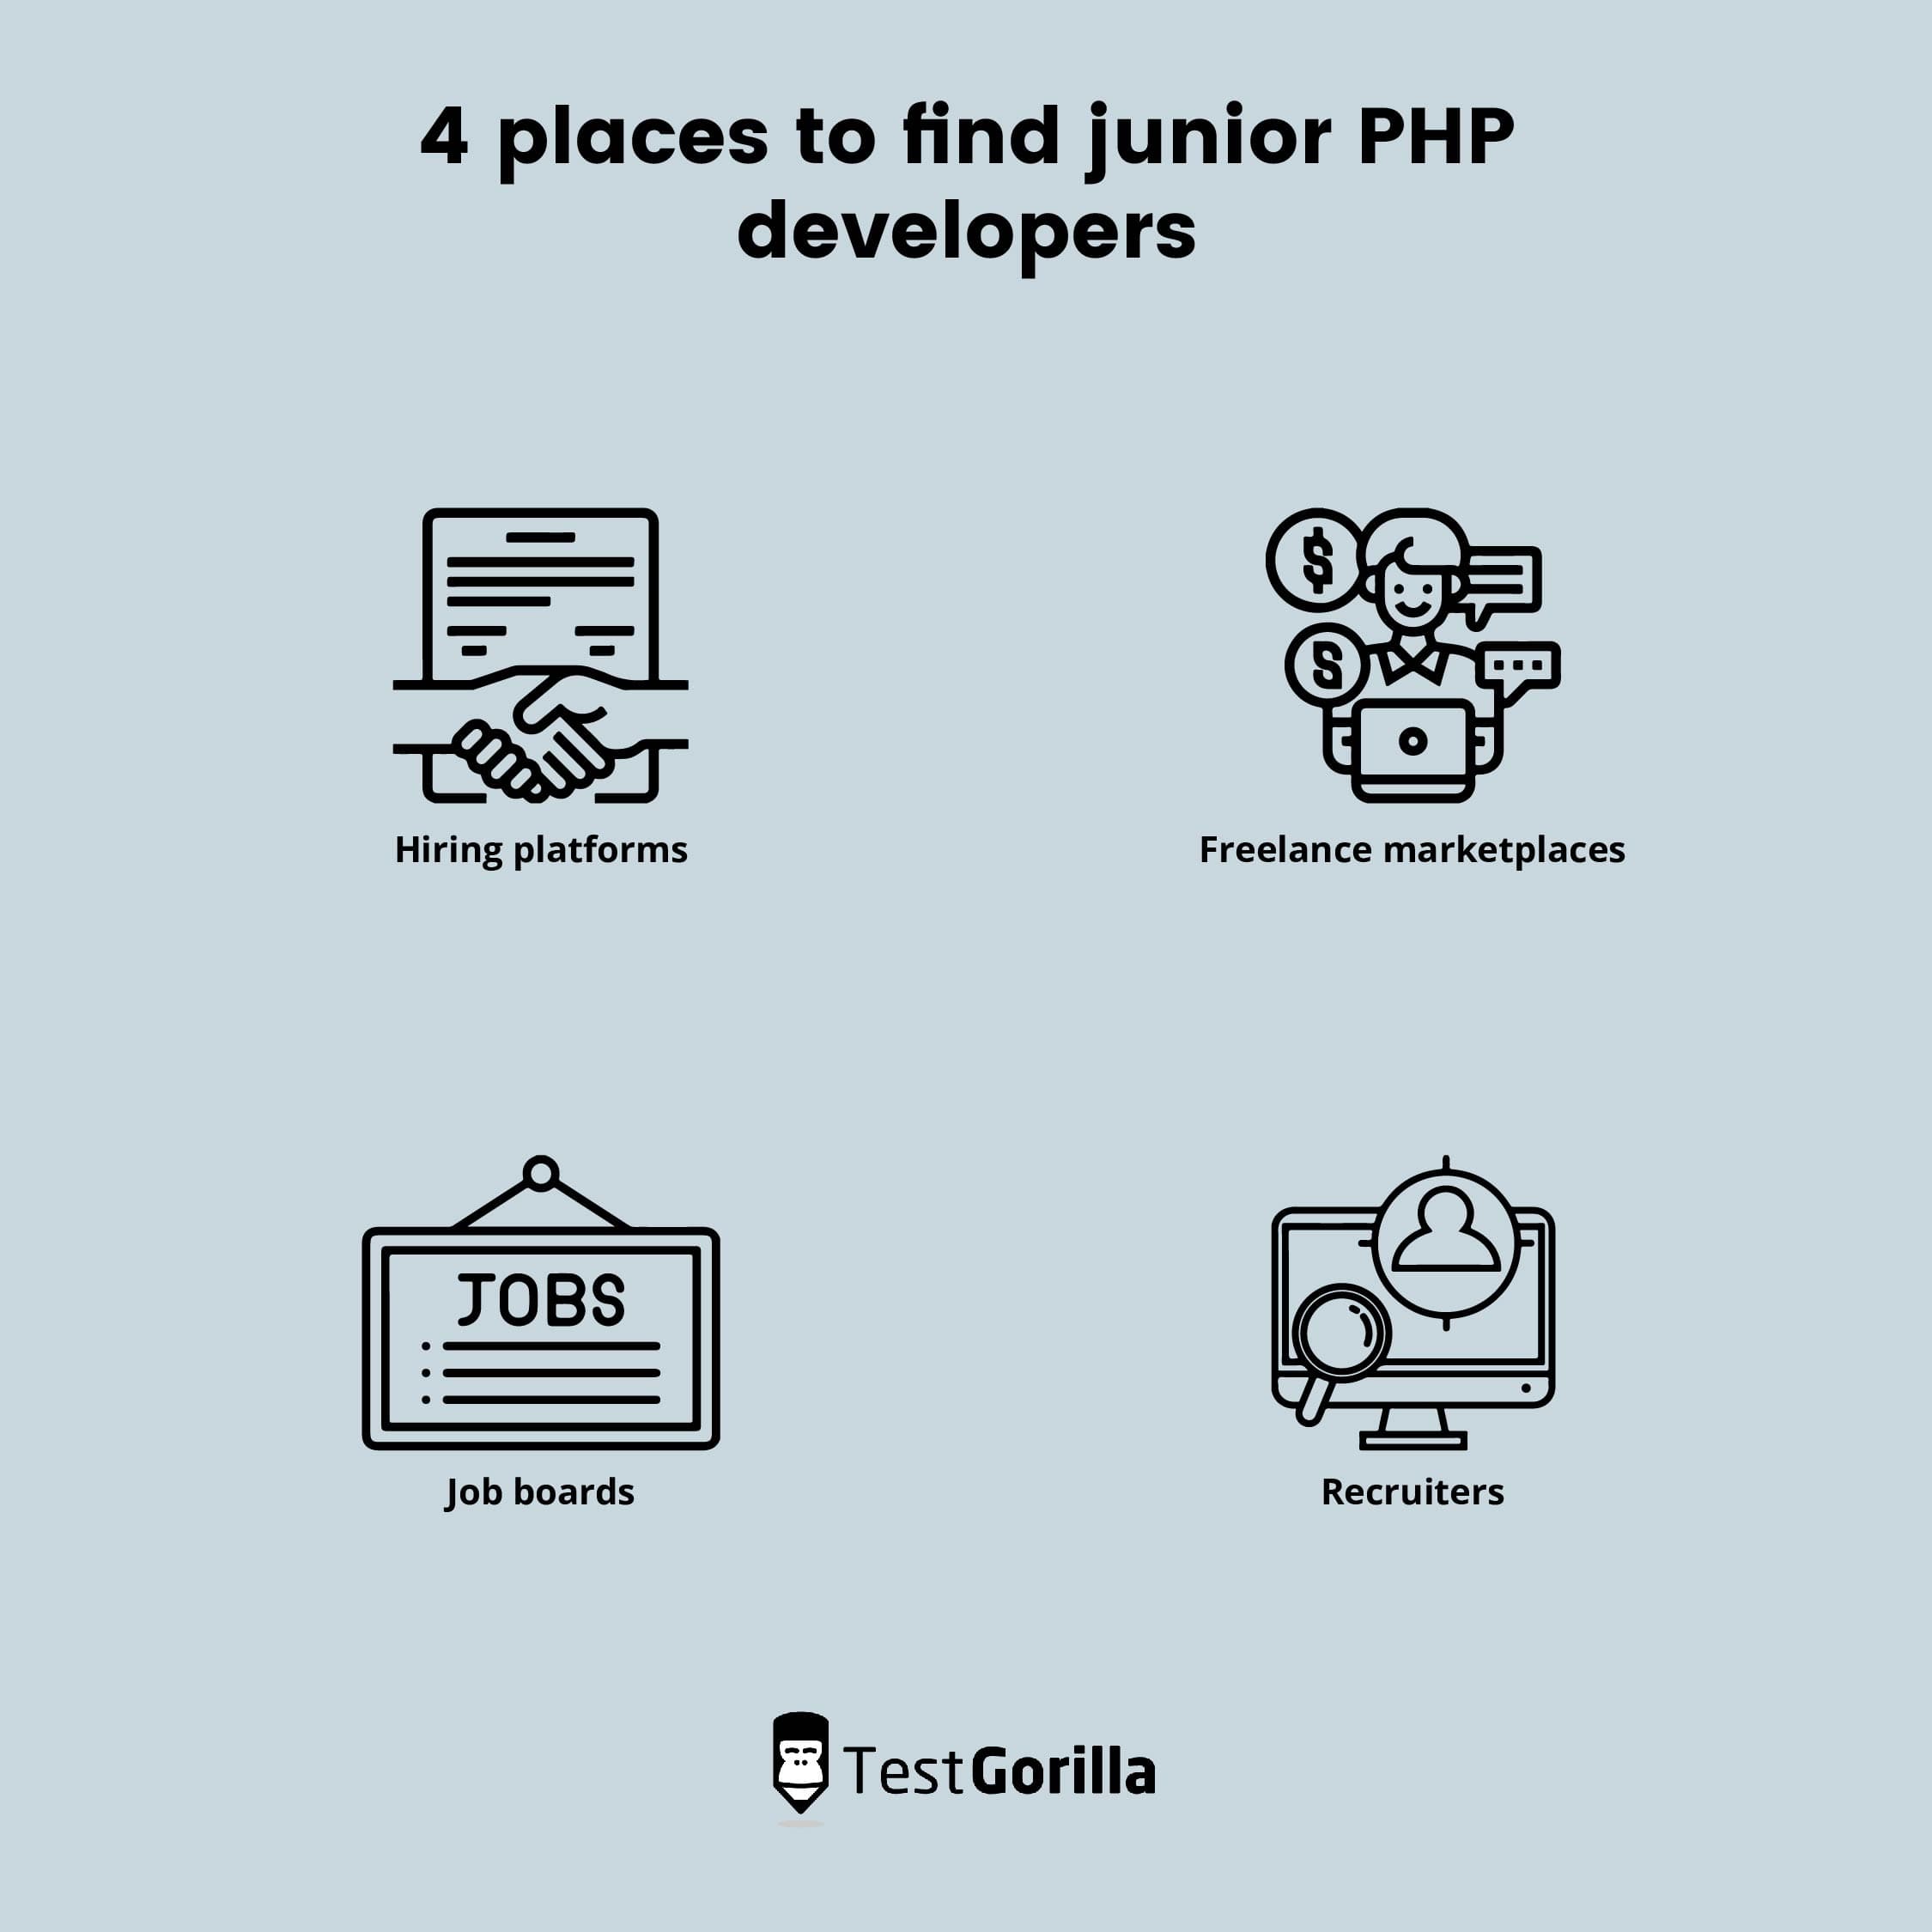 4 places to find junior PHP developers